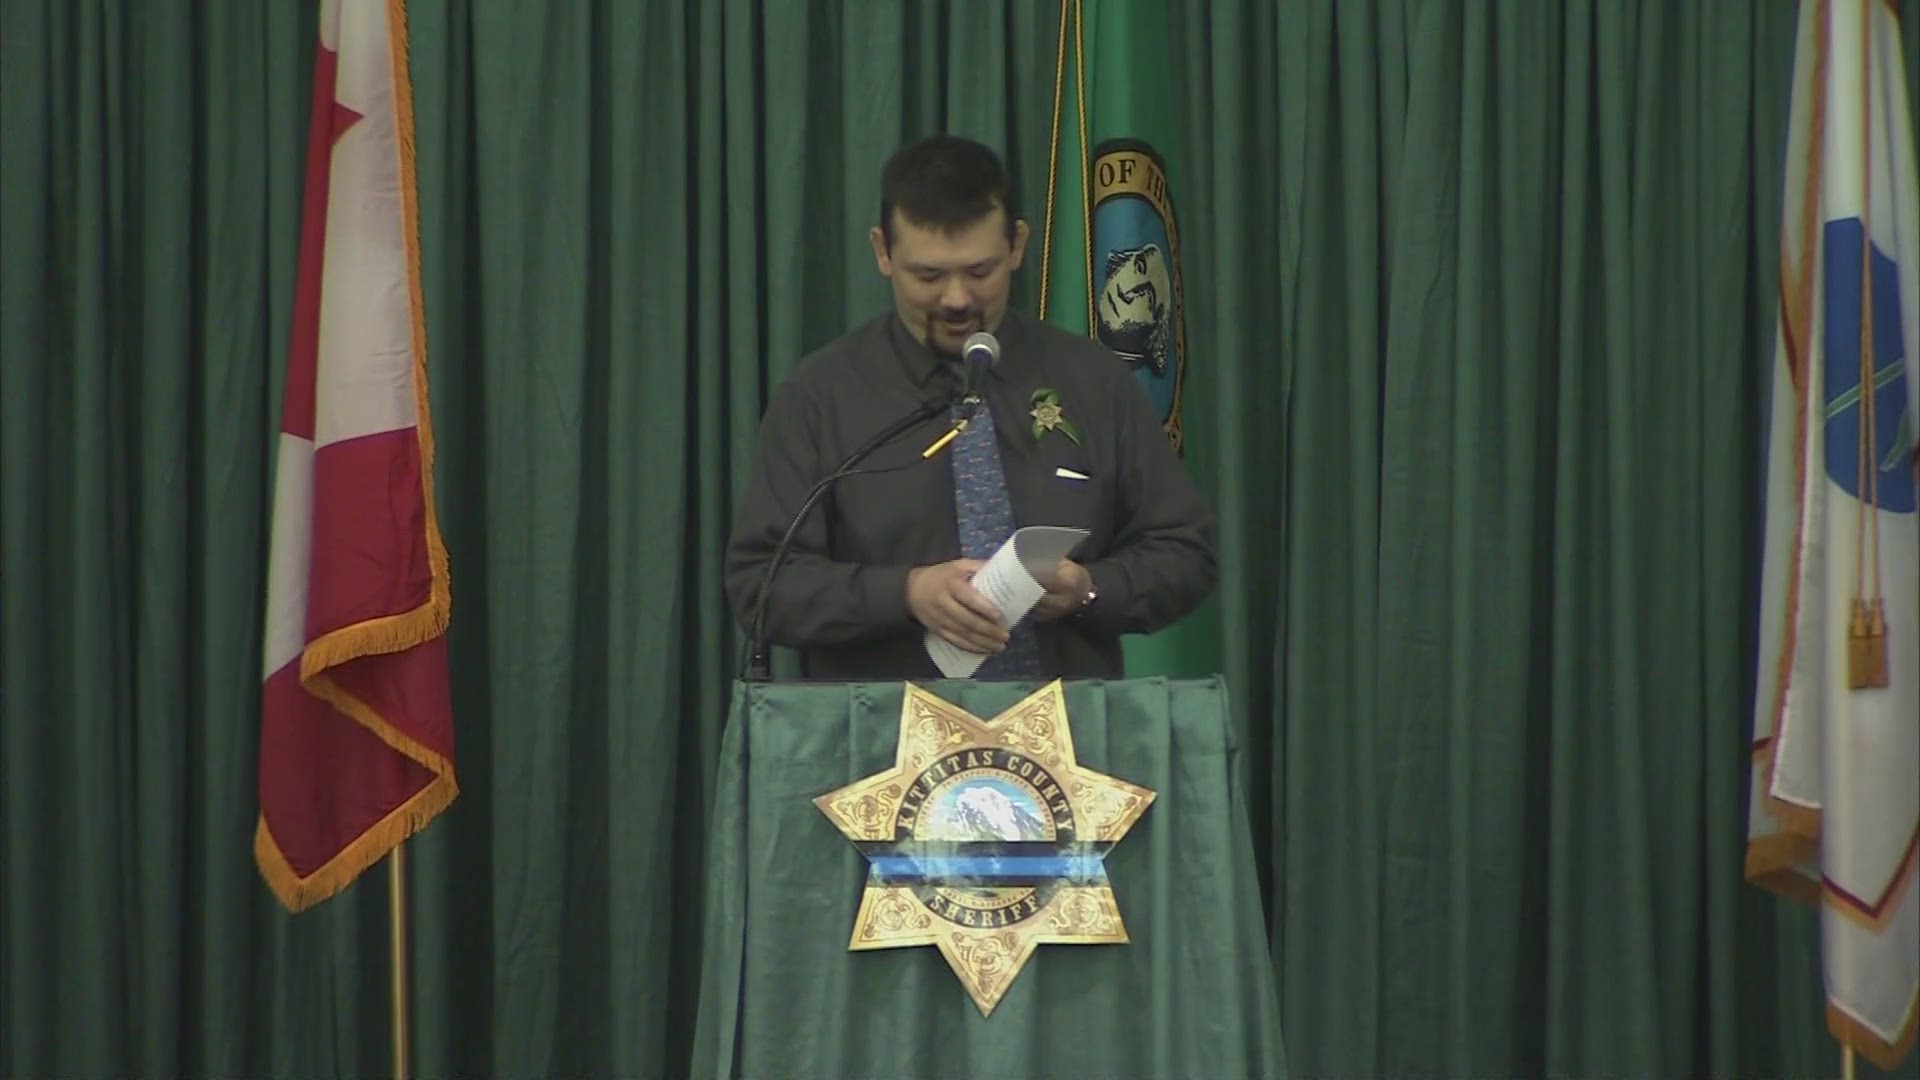 Jeremy Zender, a friend and college roommate of Deputy Ryan Thompson, speaks at Thompson’s memorial service on March 28, 2019.